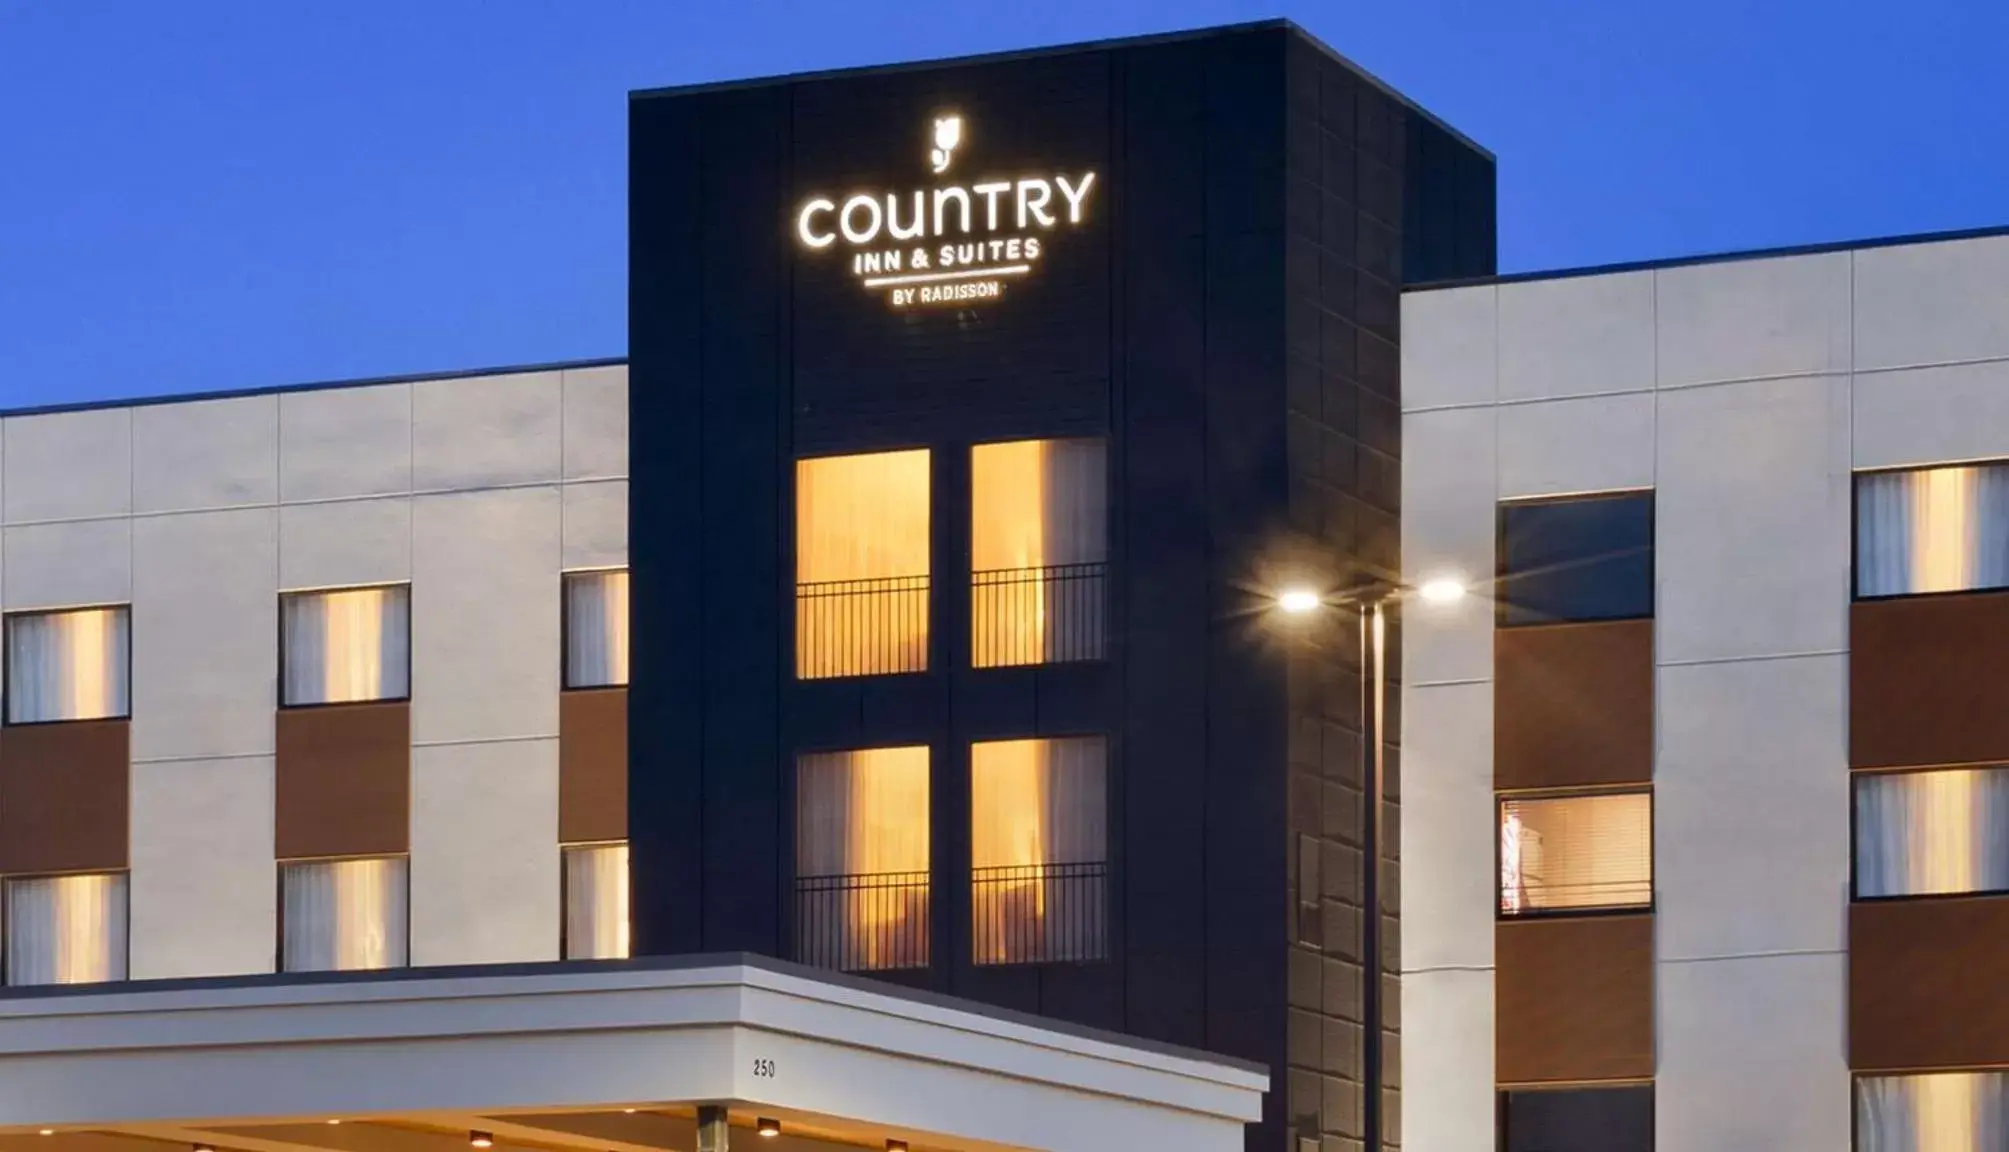 Property Building in Country Inn & Suites by Radisson, Garden City, KS